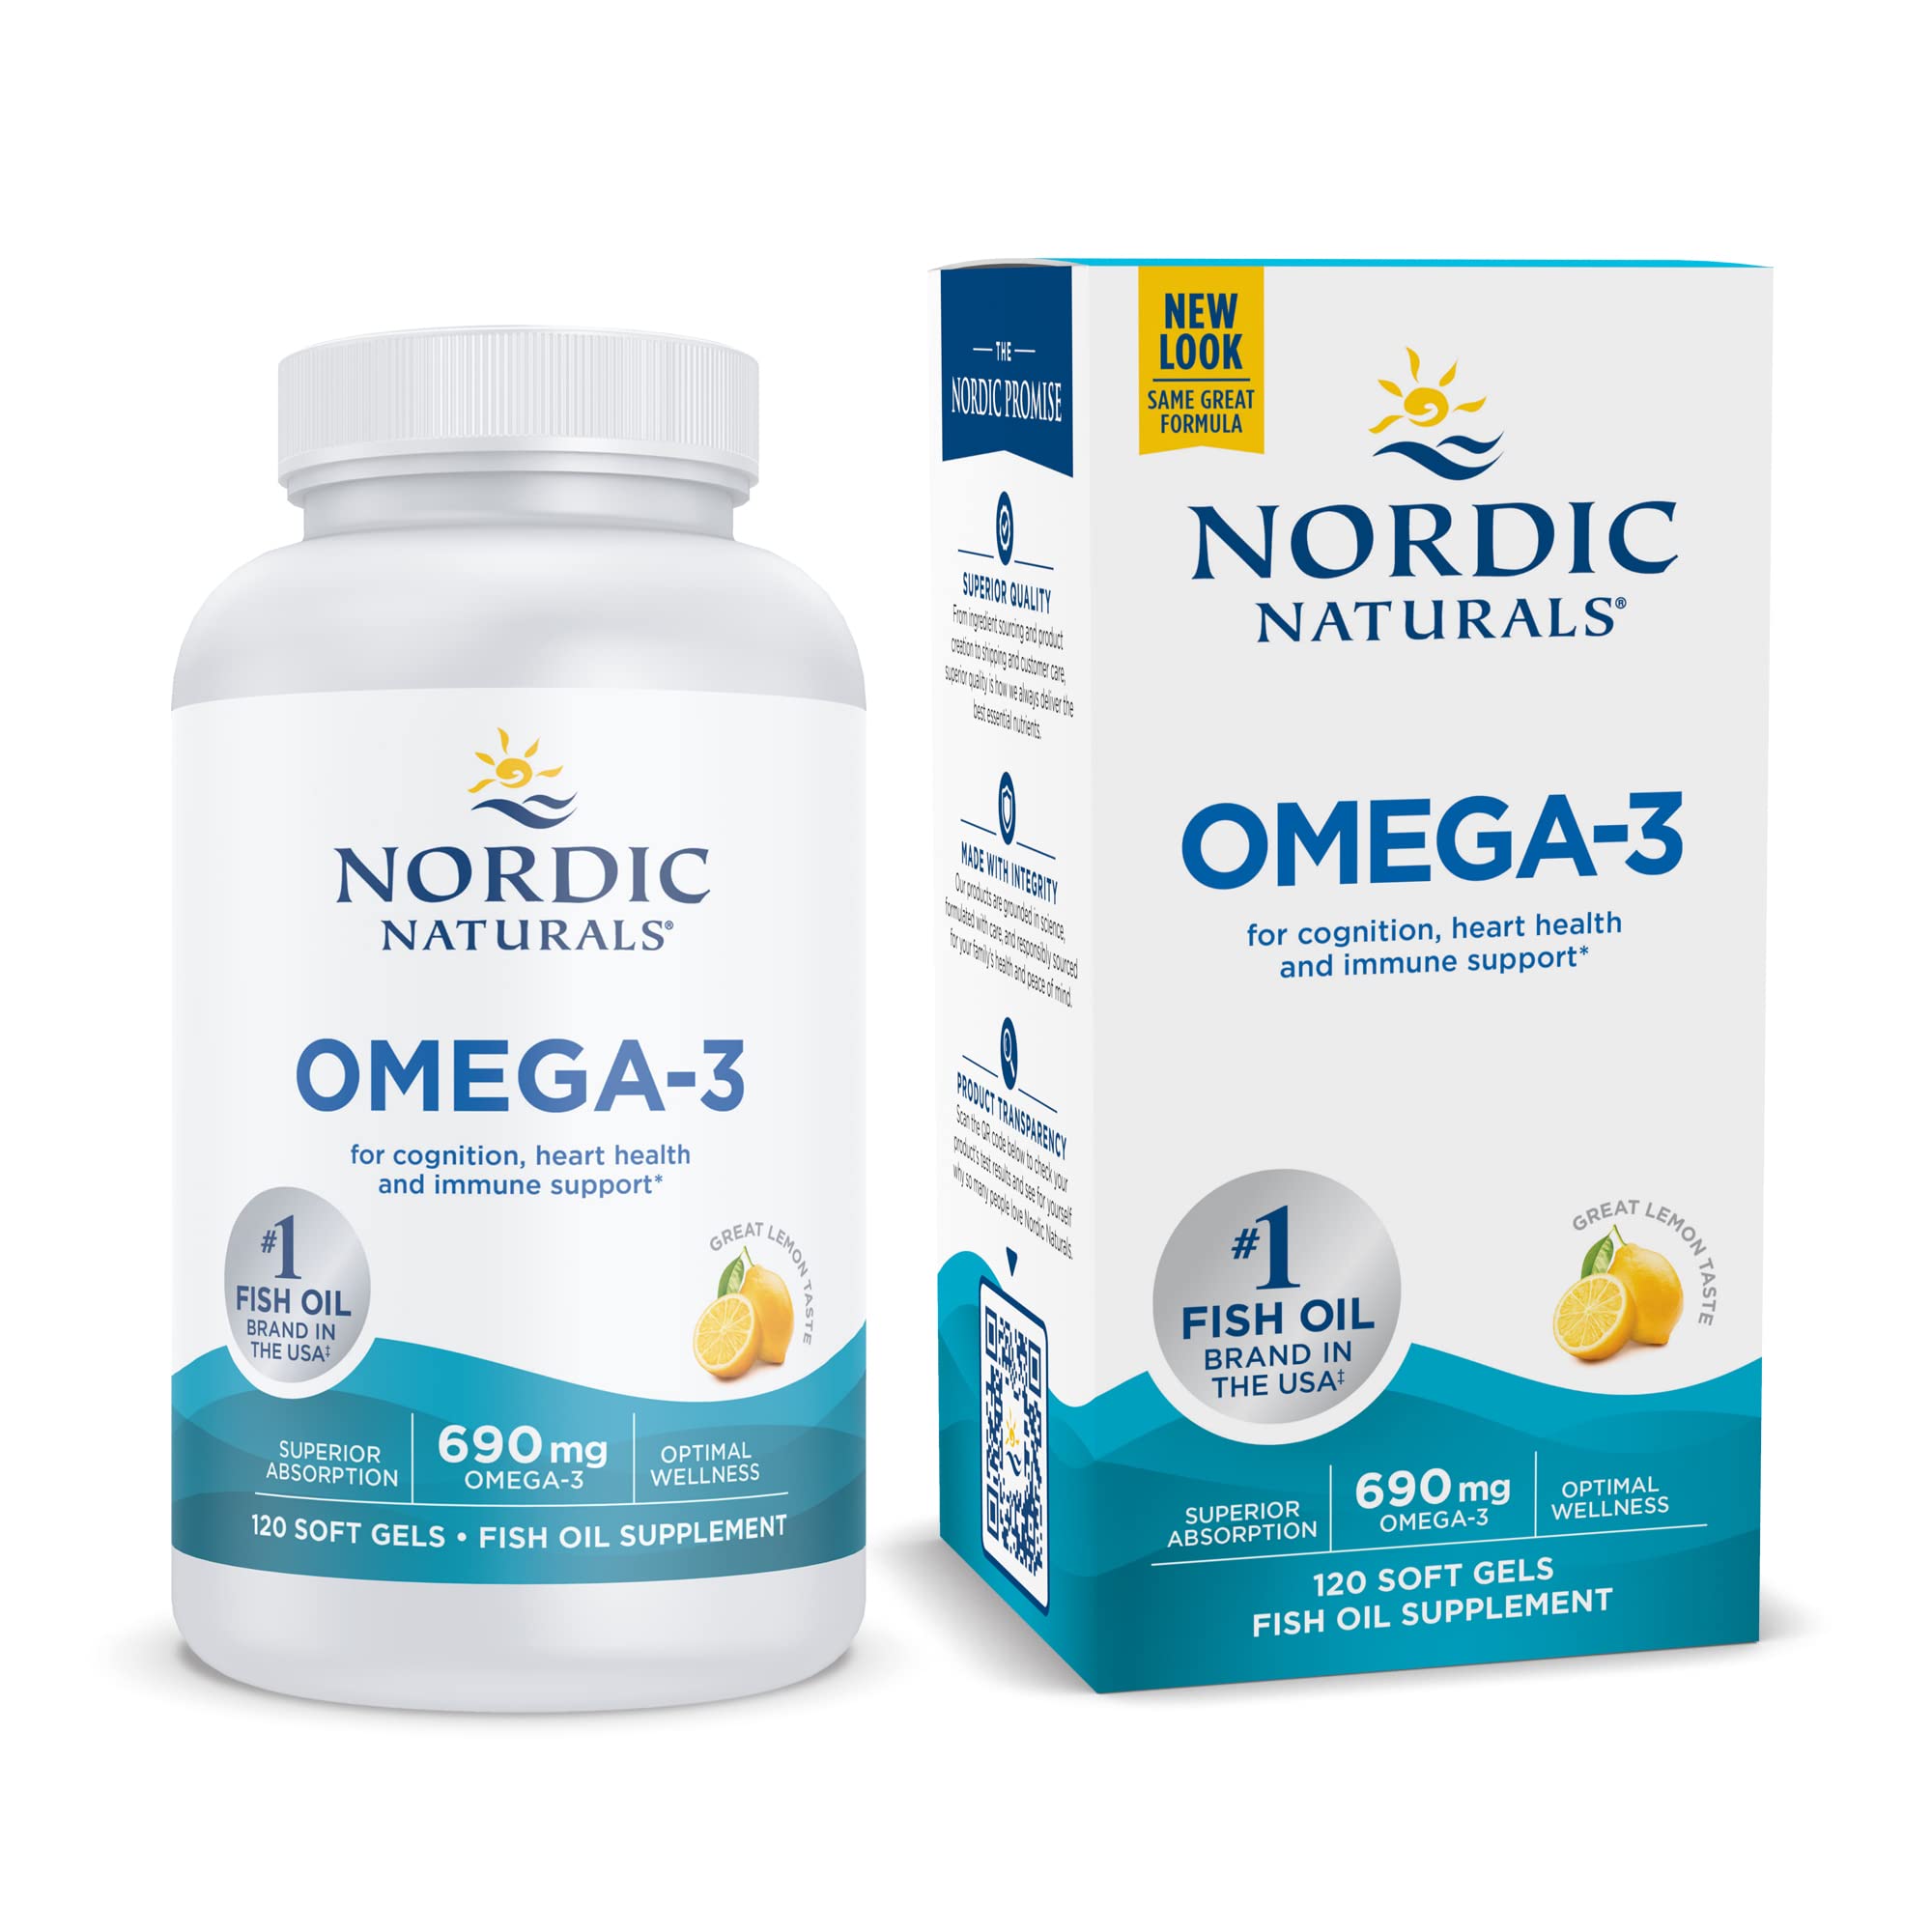 Nordic Naturals - Omega-3, Cognition, Heart Health, and Immune Support, 120 Soft Gels